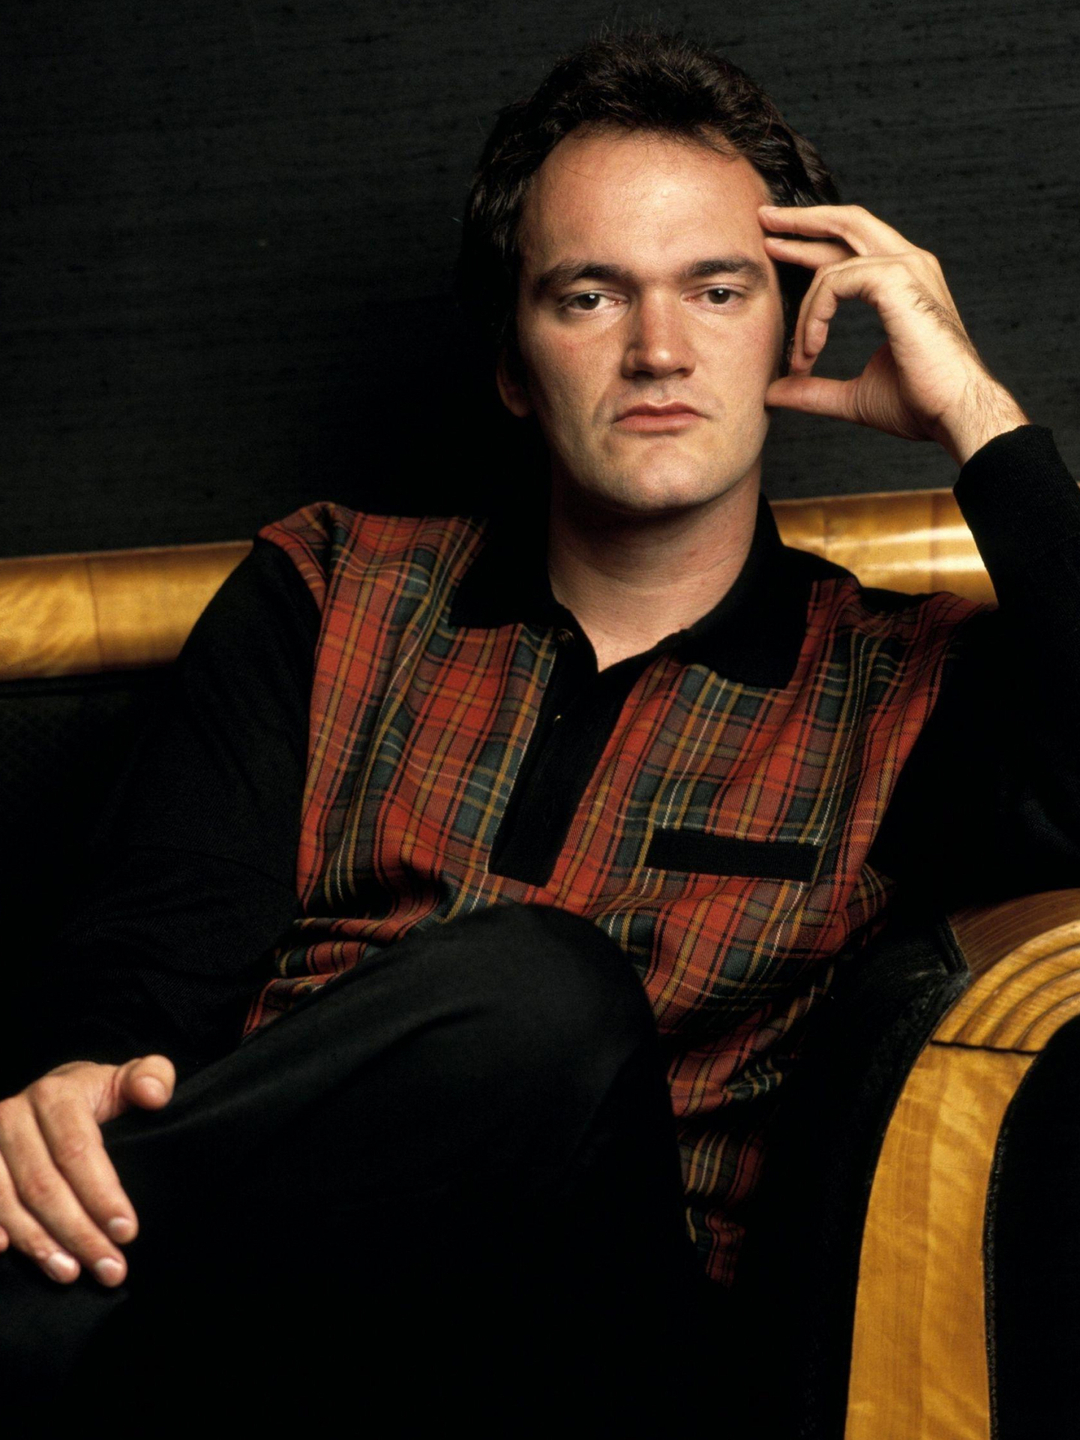 Quentin Tarantino does he have kids